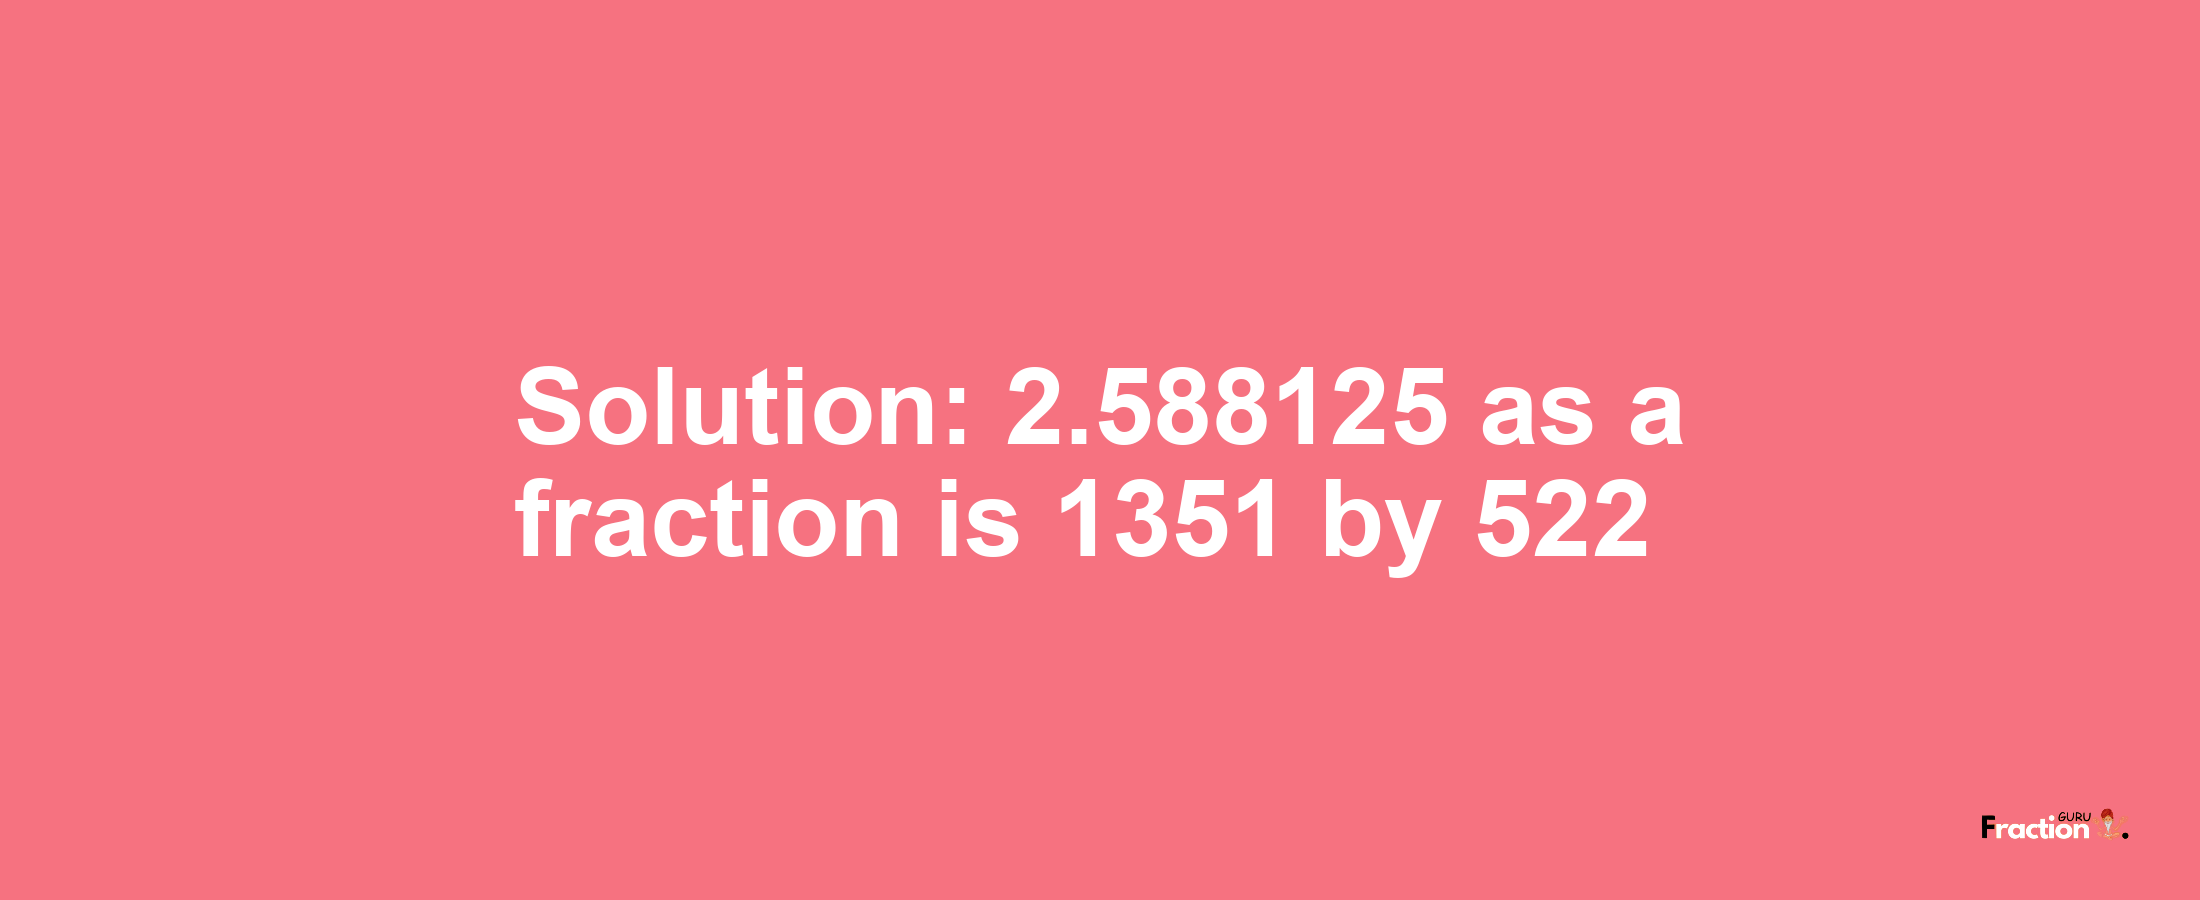 Solution:2.588125 as a fraction is 1351/522